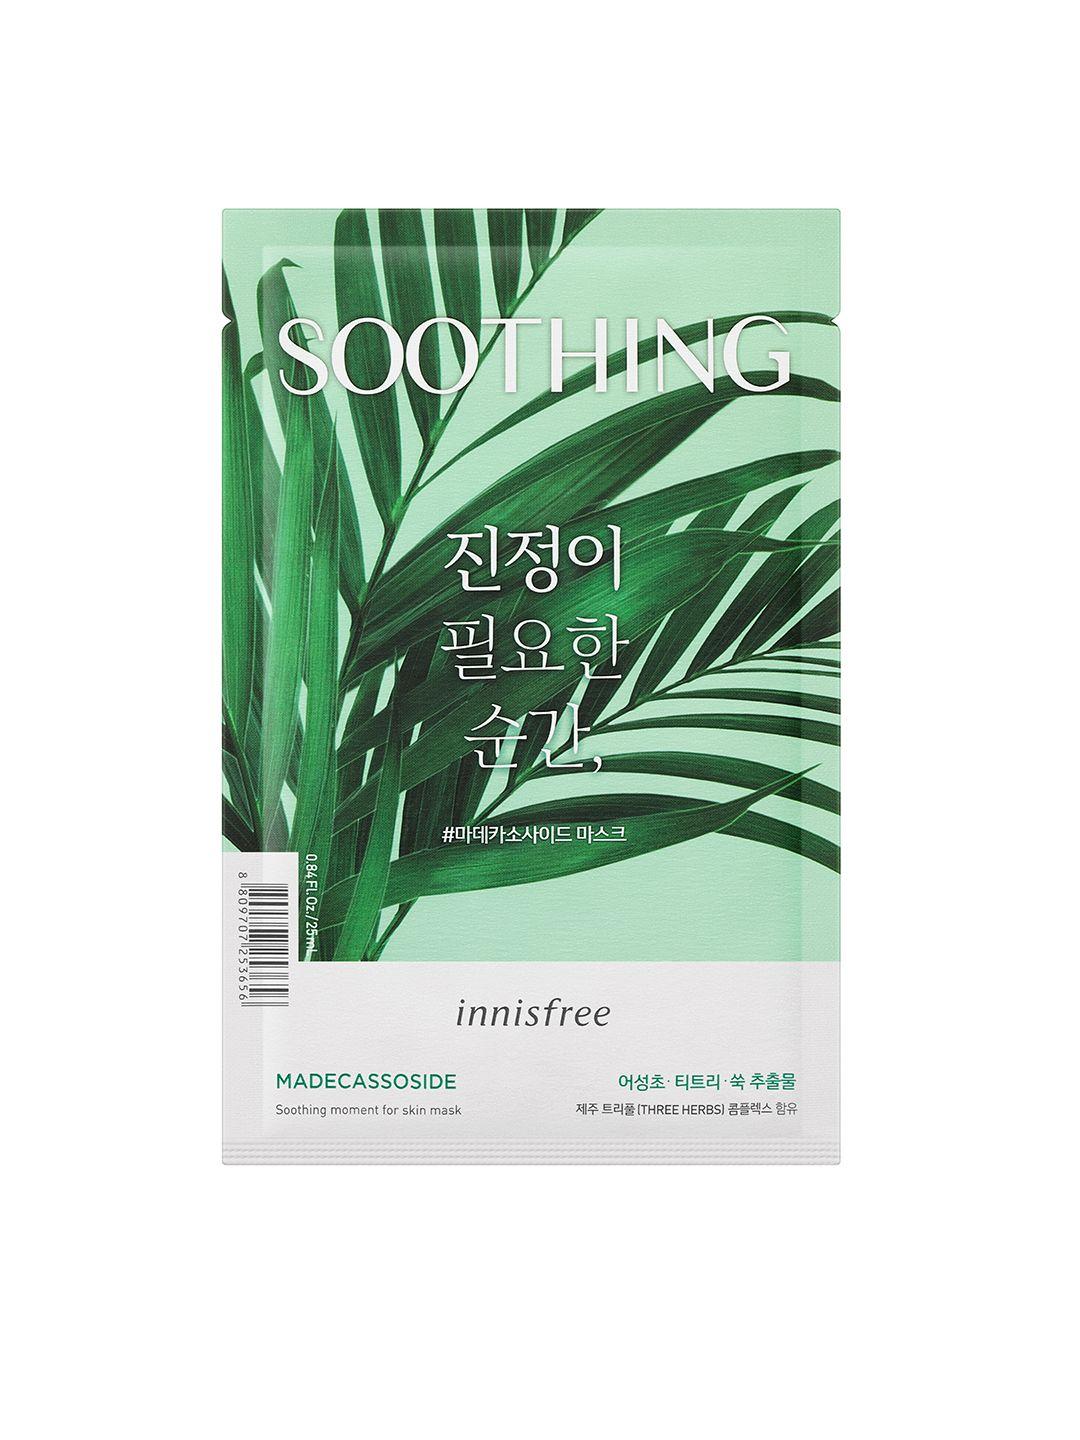 innisfree-madecassoside-soothing-moment-for-skin-mask